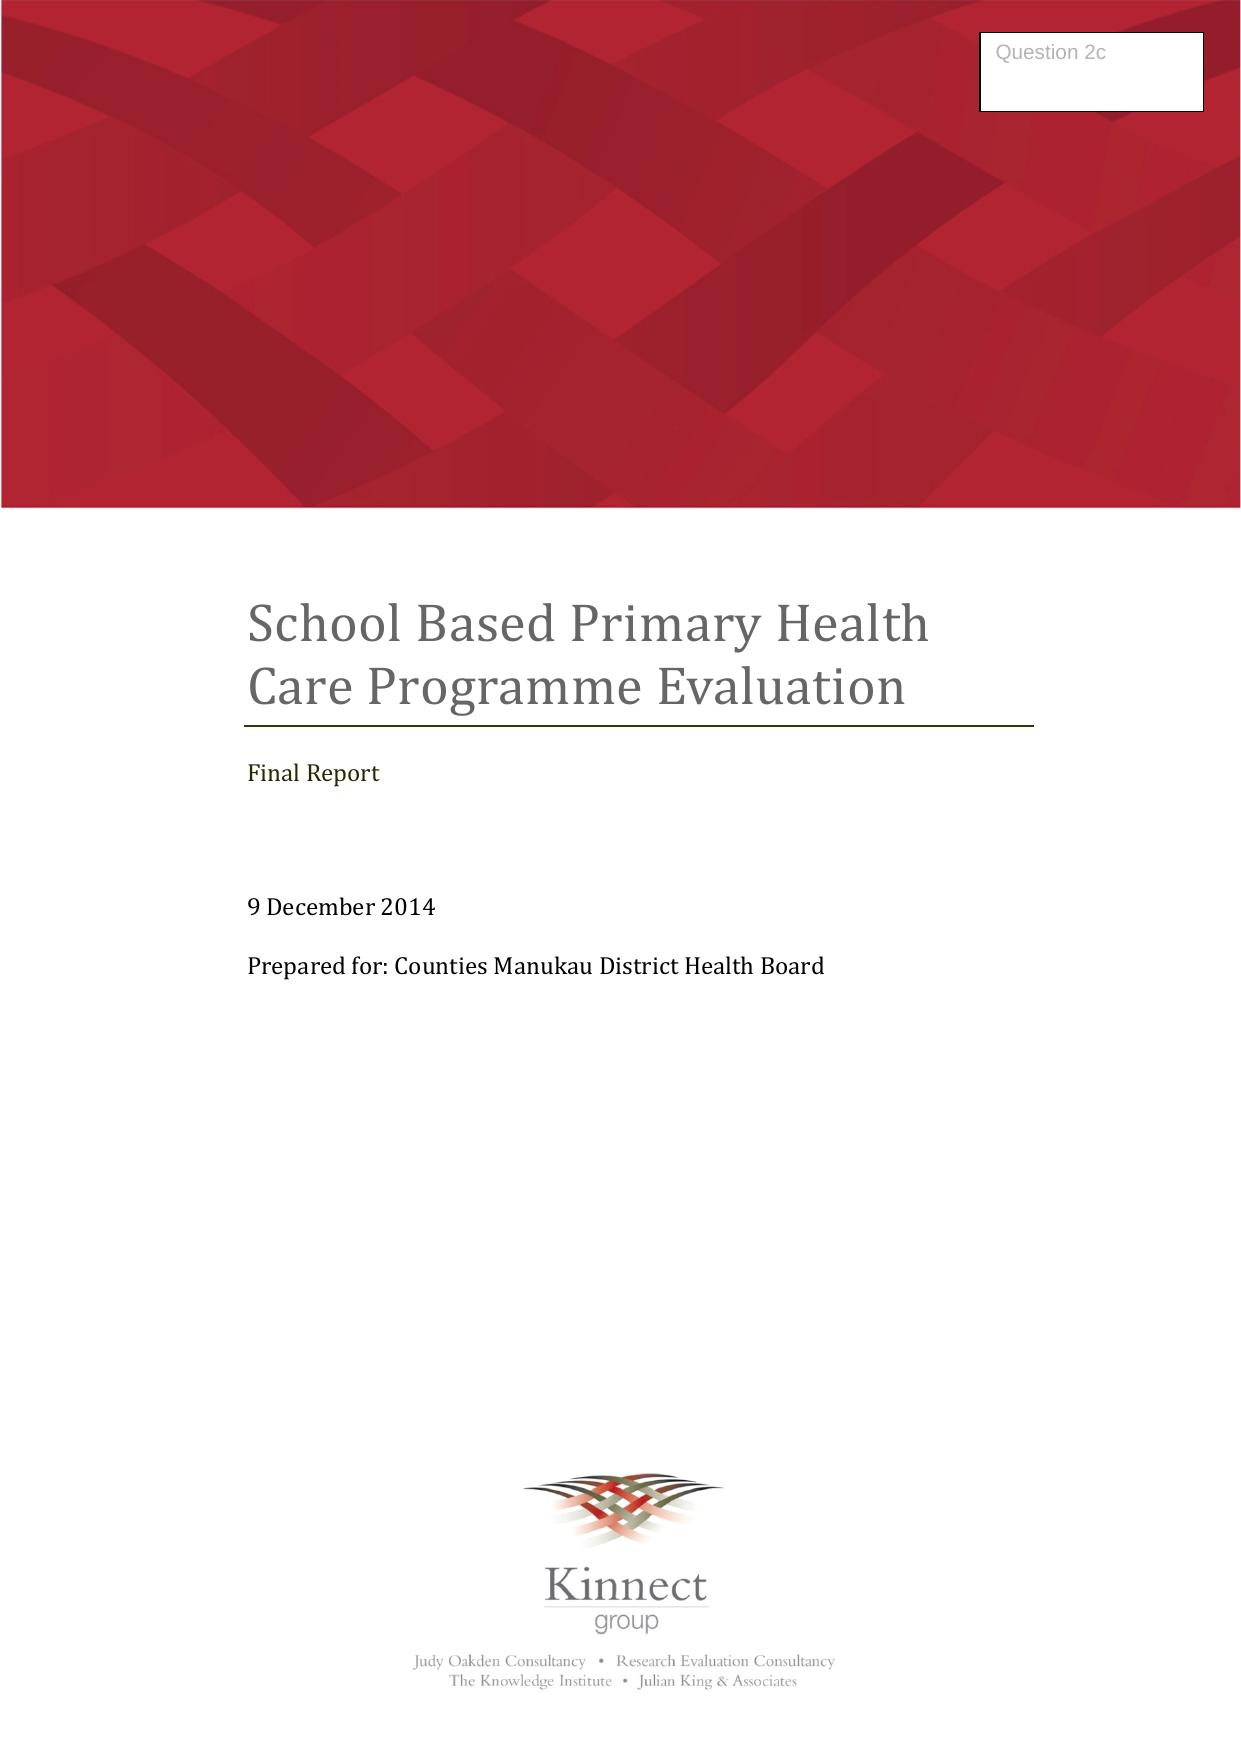 School Based Primary Health Care Programme Evaluation